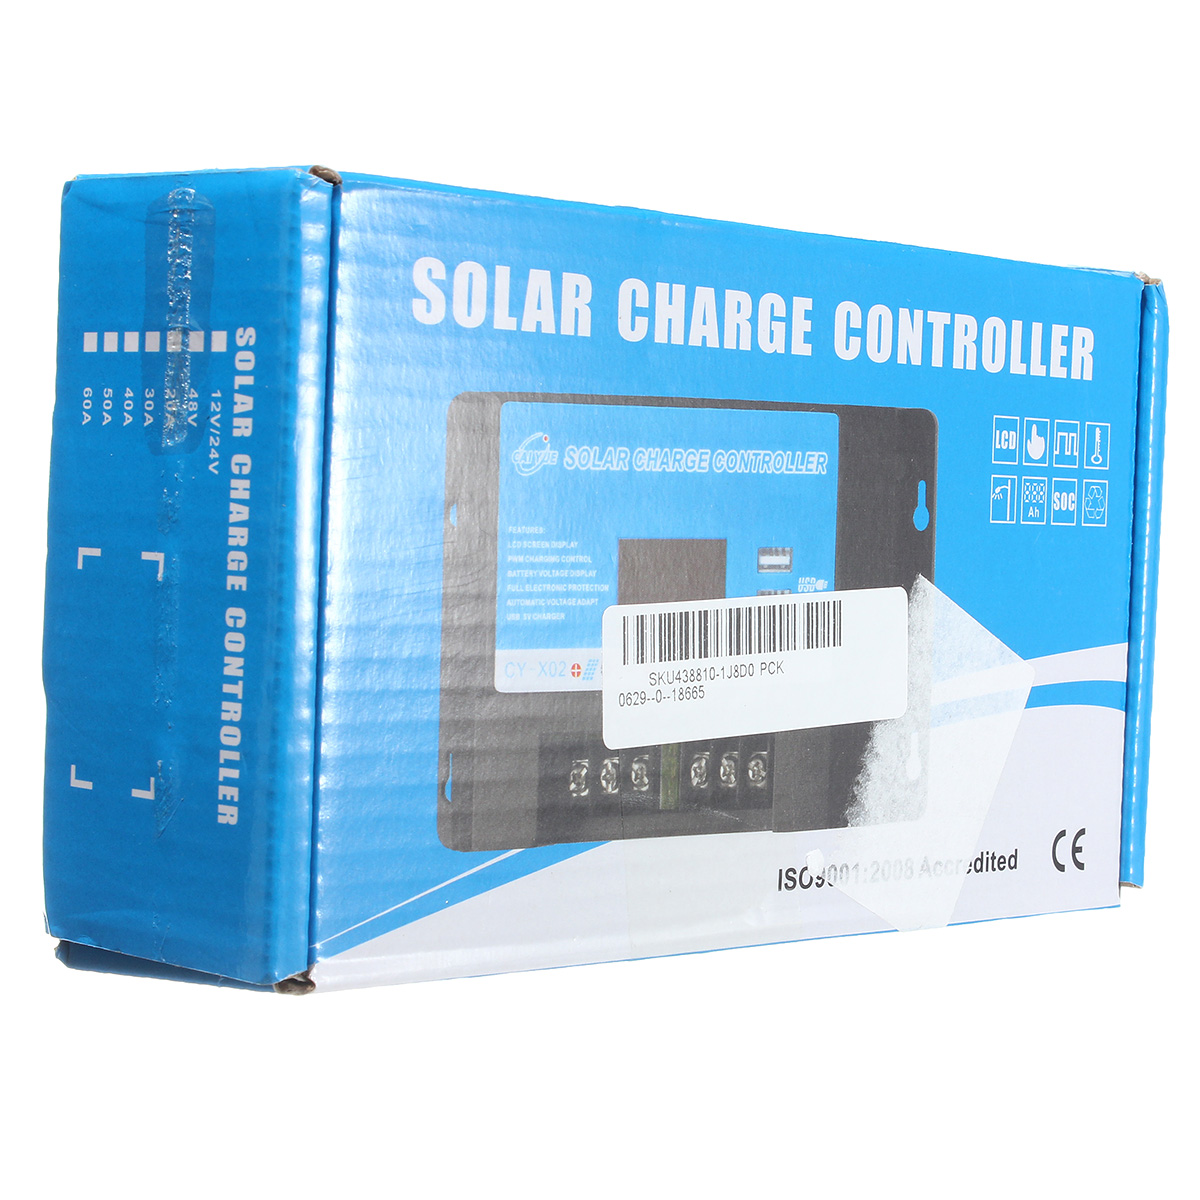 LCD-20A-1224V-Solar-Charge-Controller-Regulator-with-USB-Port-1089471-10